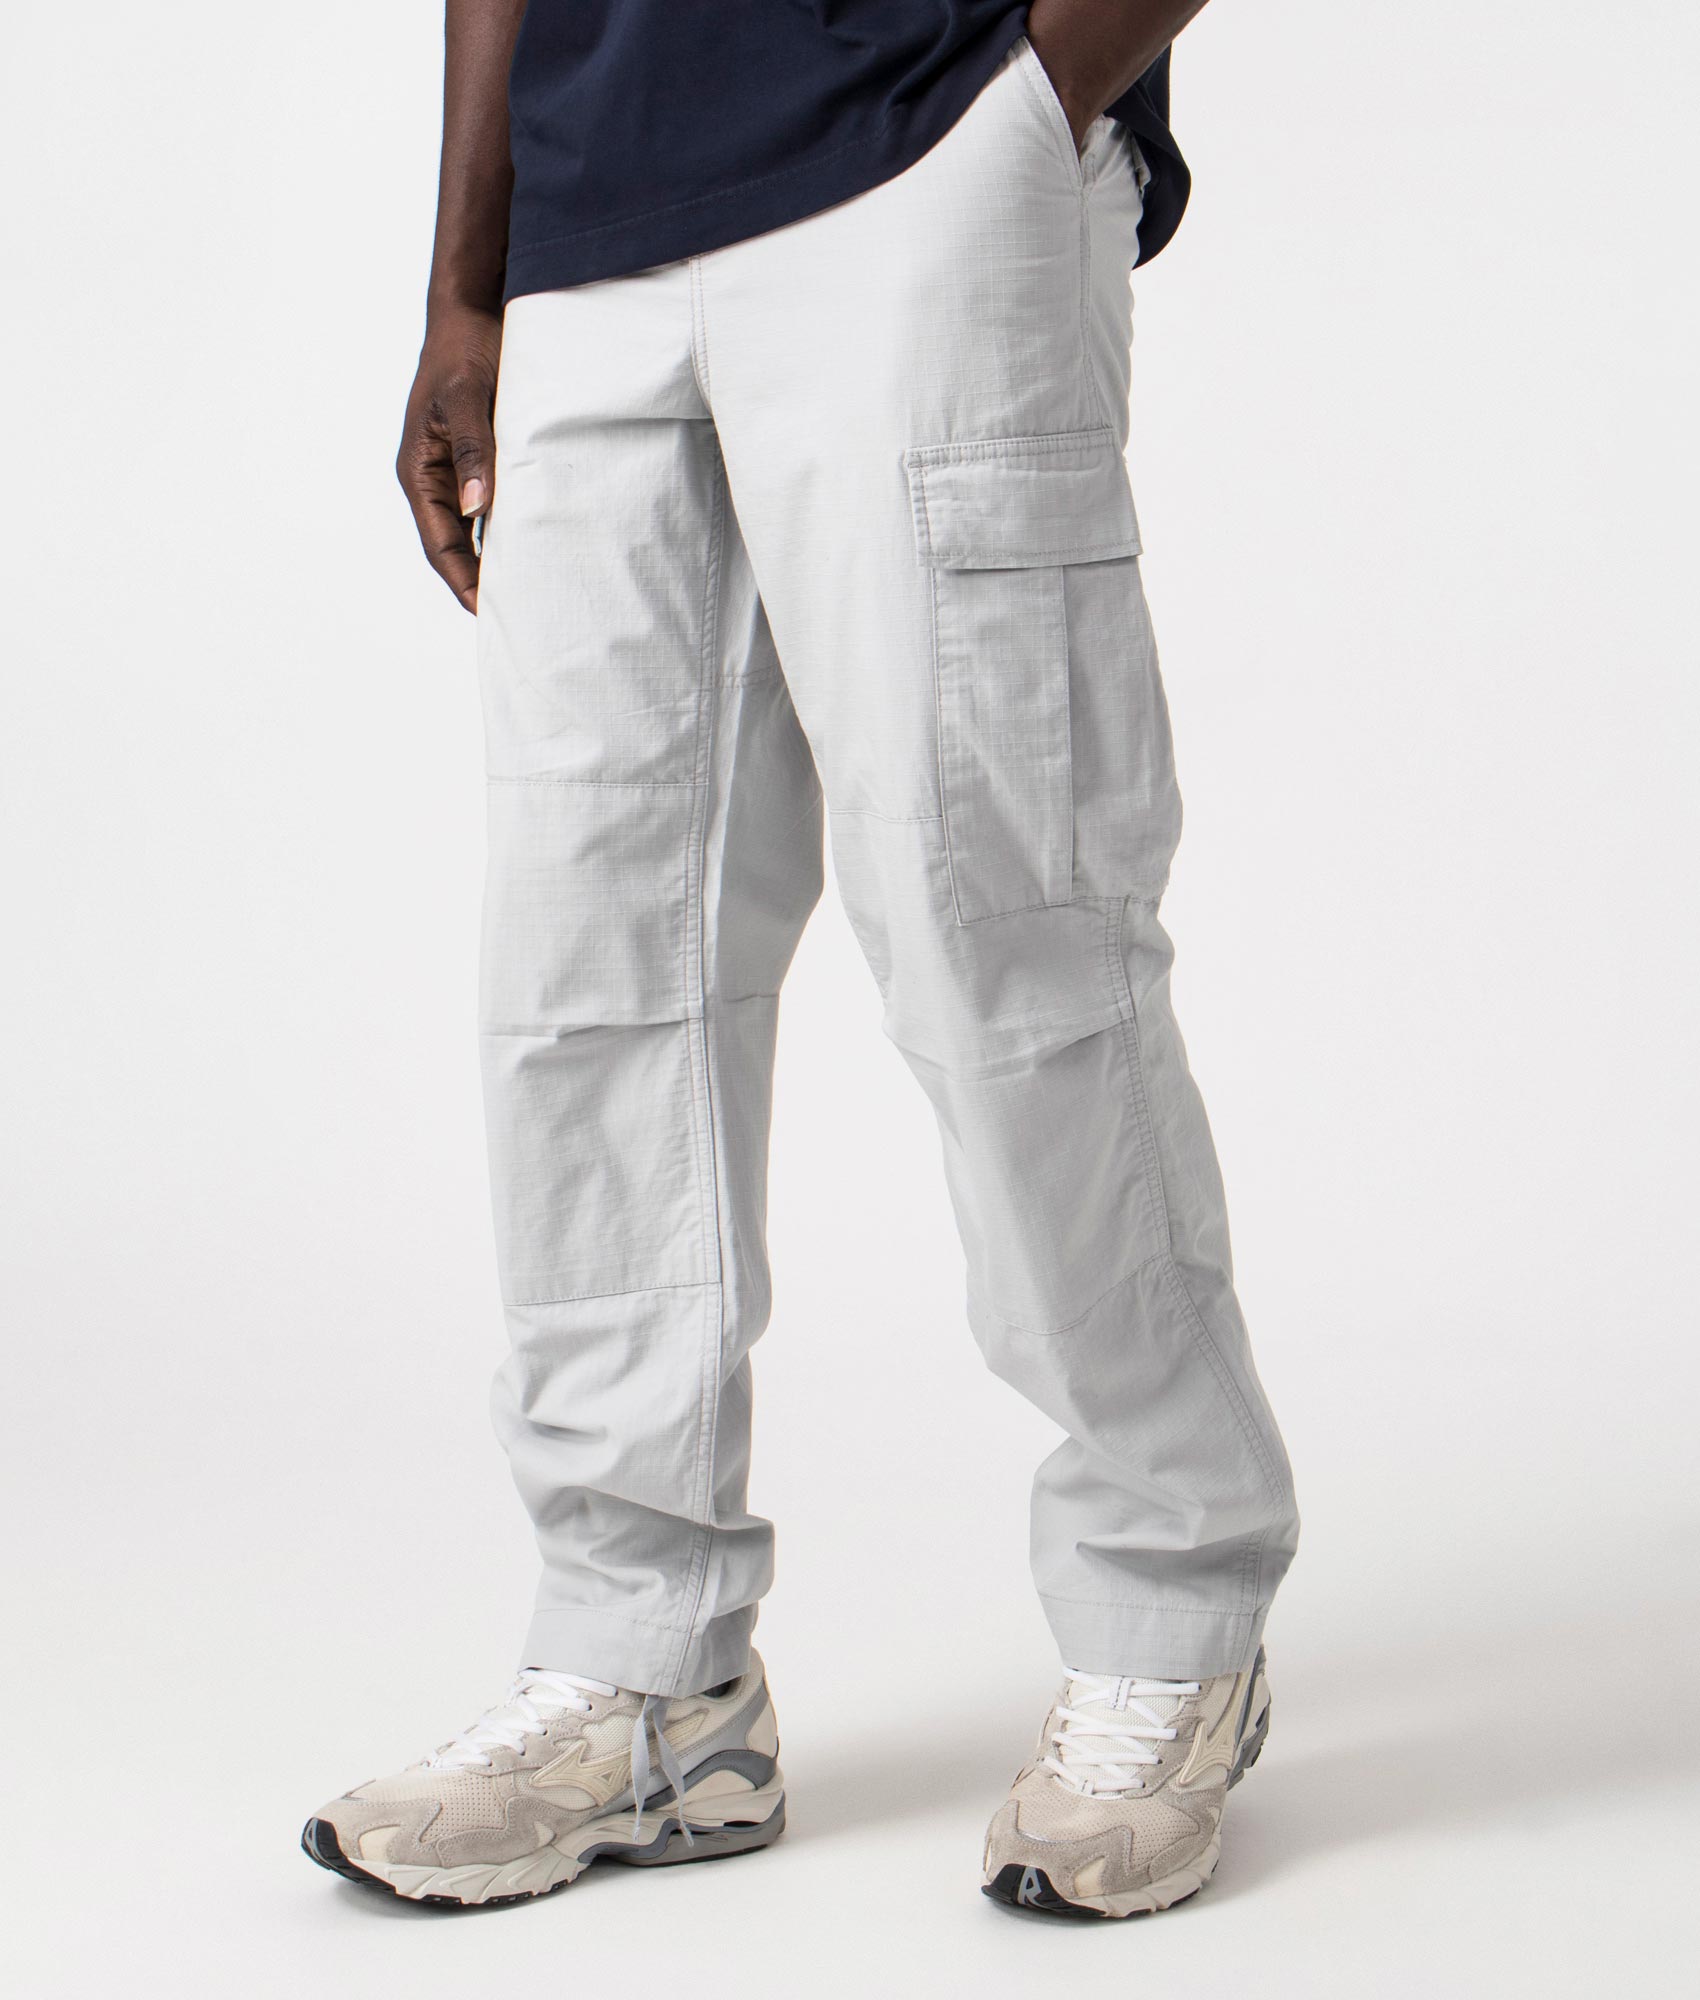 Carhartt WIP Mens Regular Fit Cargo Pants - Colour: 1YE02 Sonic Silver - Size: 36S